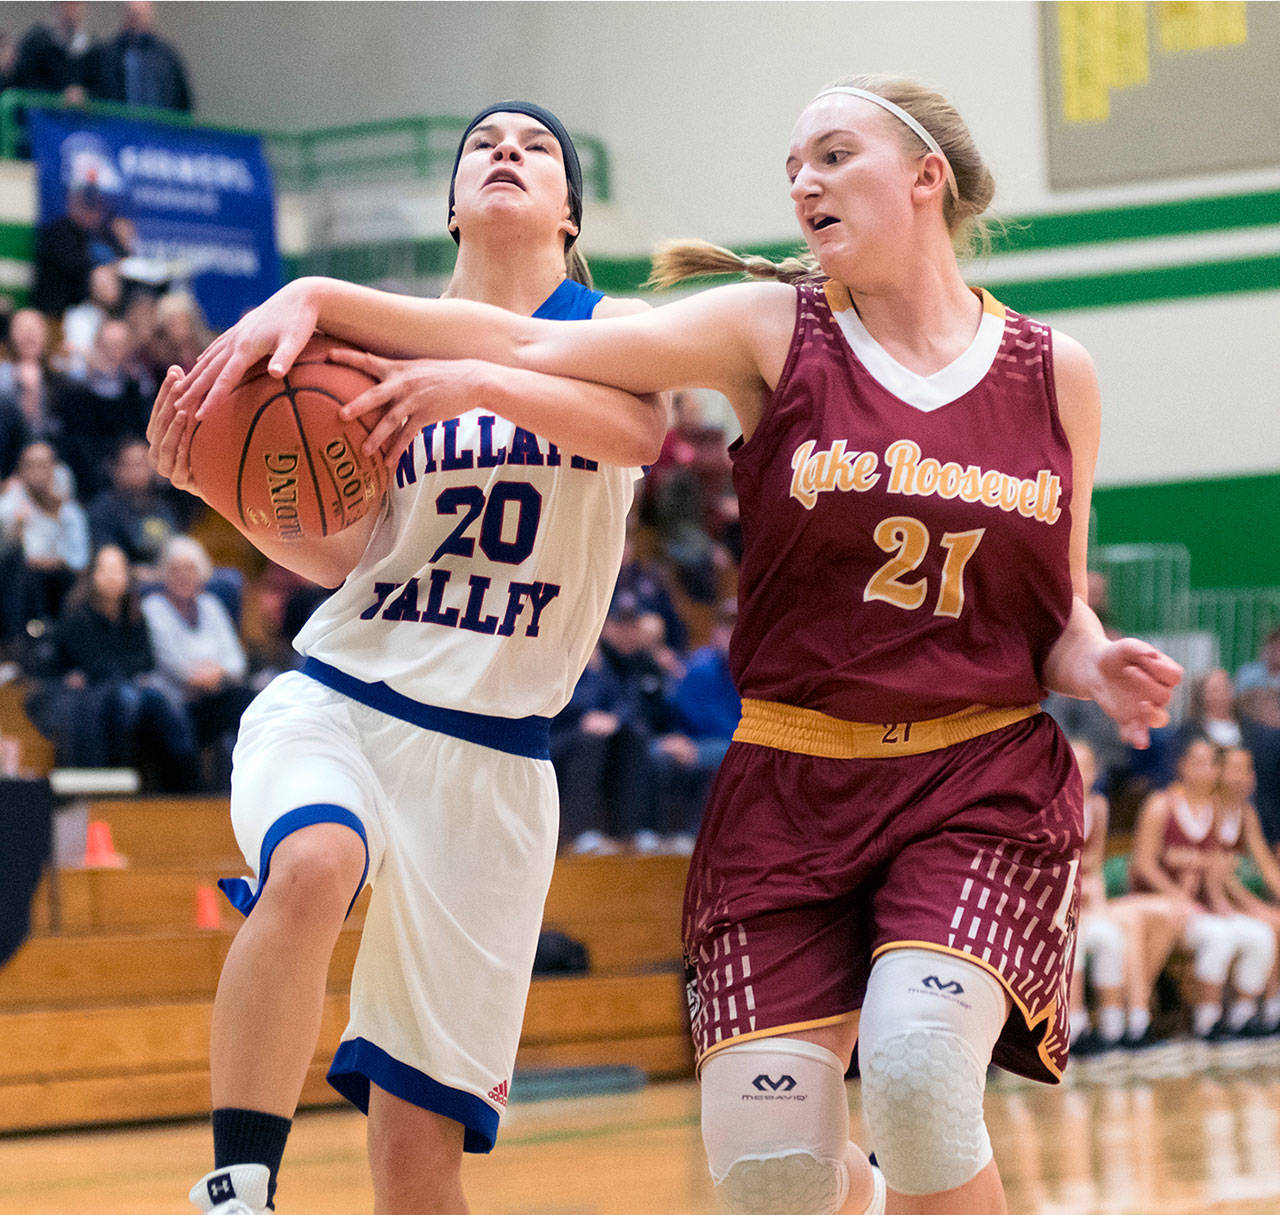 Willapa Valley’s Brooke Friese, left, is defended by Lake Roosevelt’s Kelsie Olbricht during the Vikings’ 44-35 win in the 2B Regional Playoffs on Friday. Friese scored a team-high 18 points in the contest. (Matt Baide | The Chronicle)